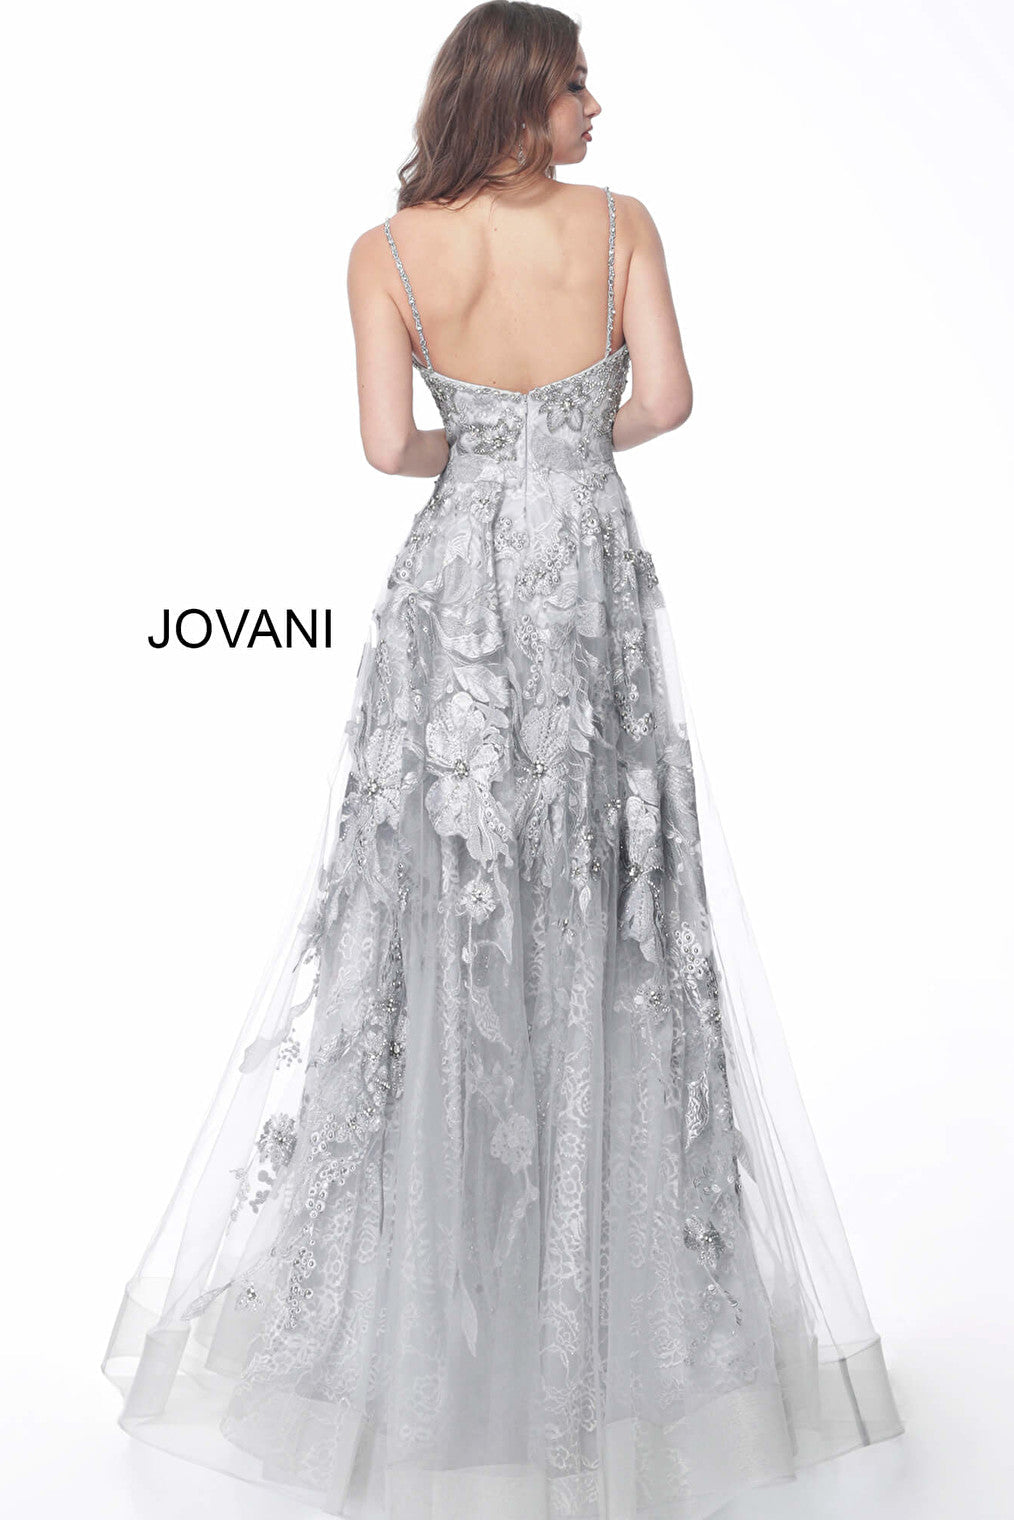 Jovani silver embroidered long evening dress 62405